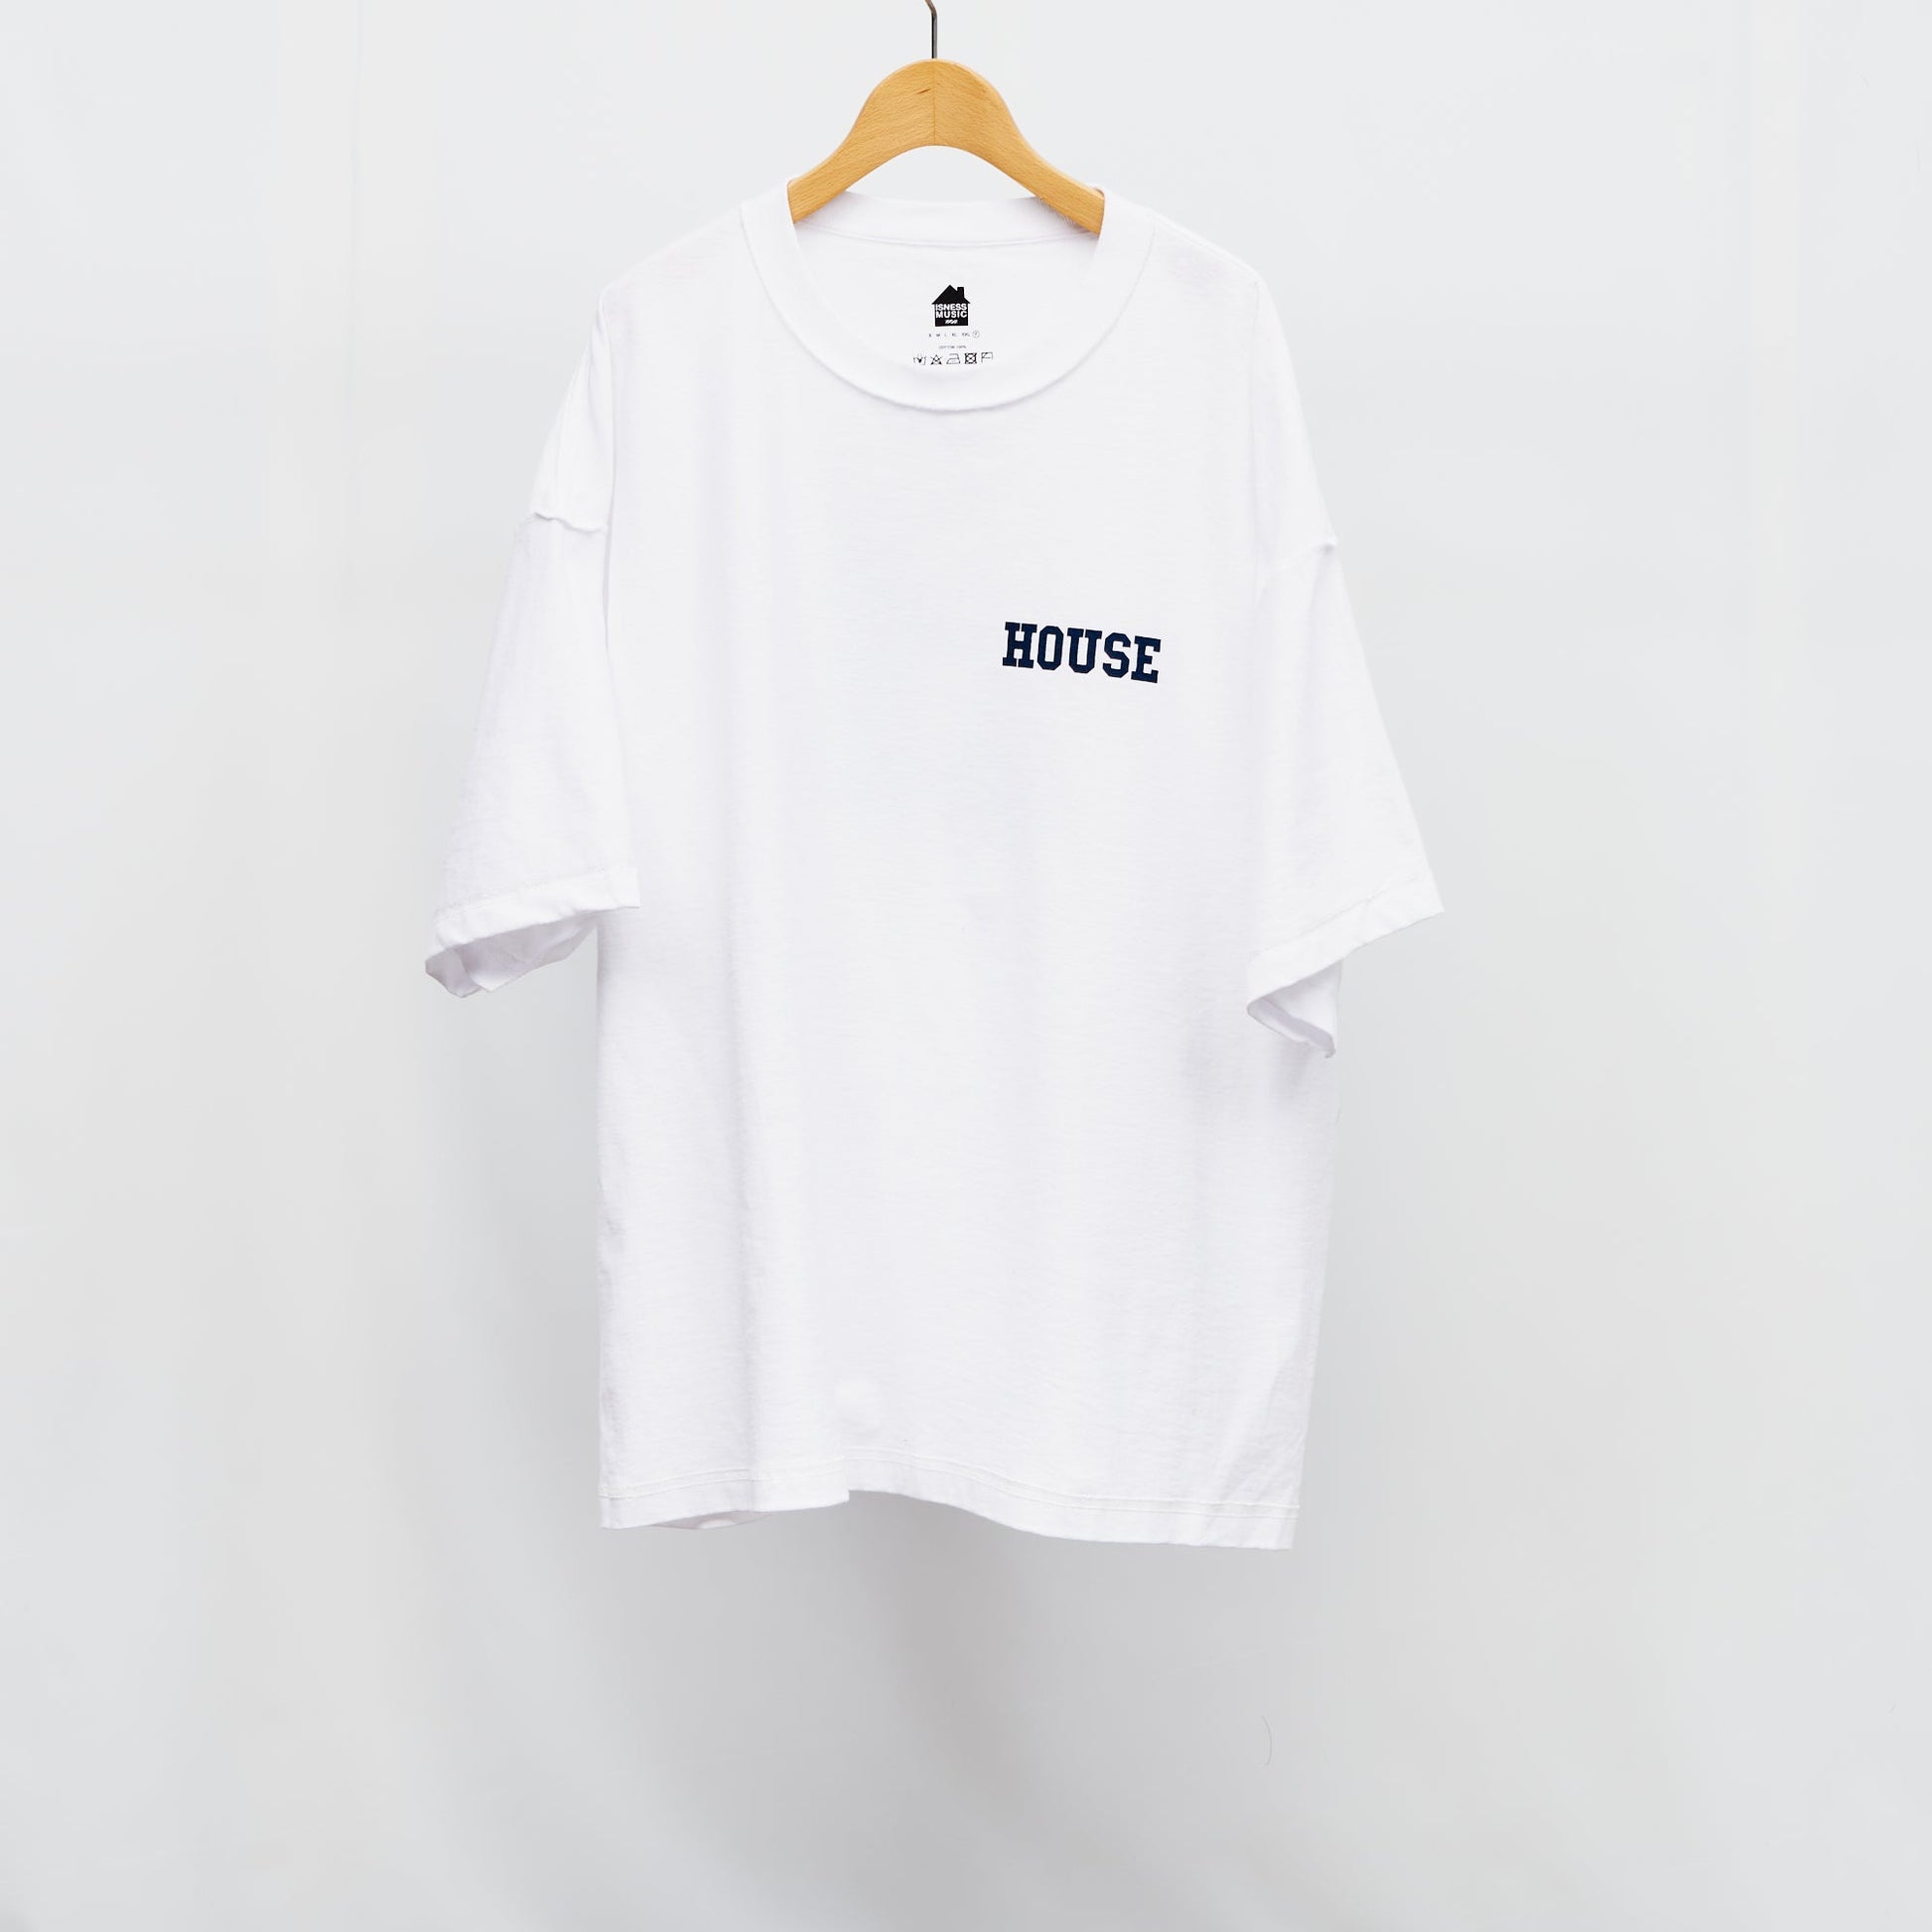 HOUSE S/S T-SHIRTS is-ness online shop 2